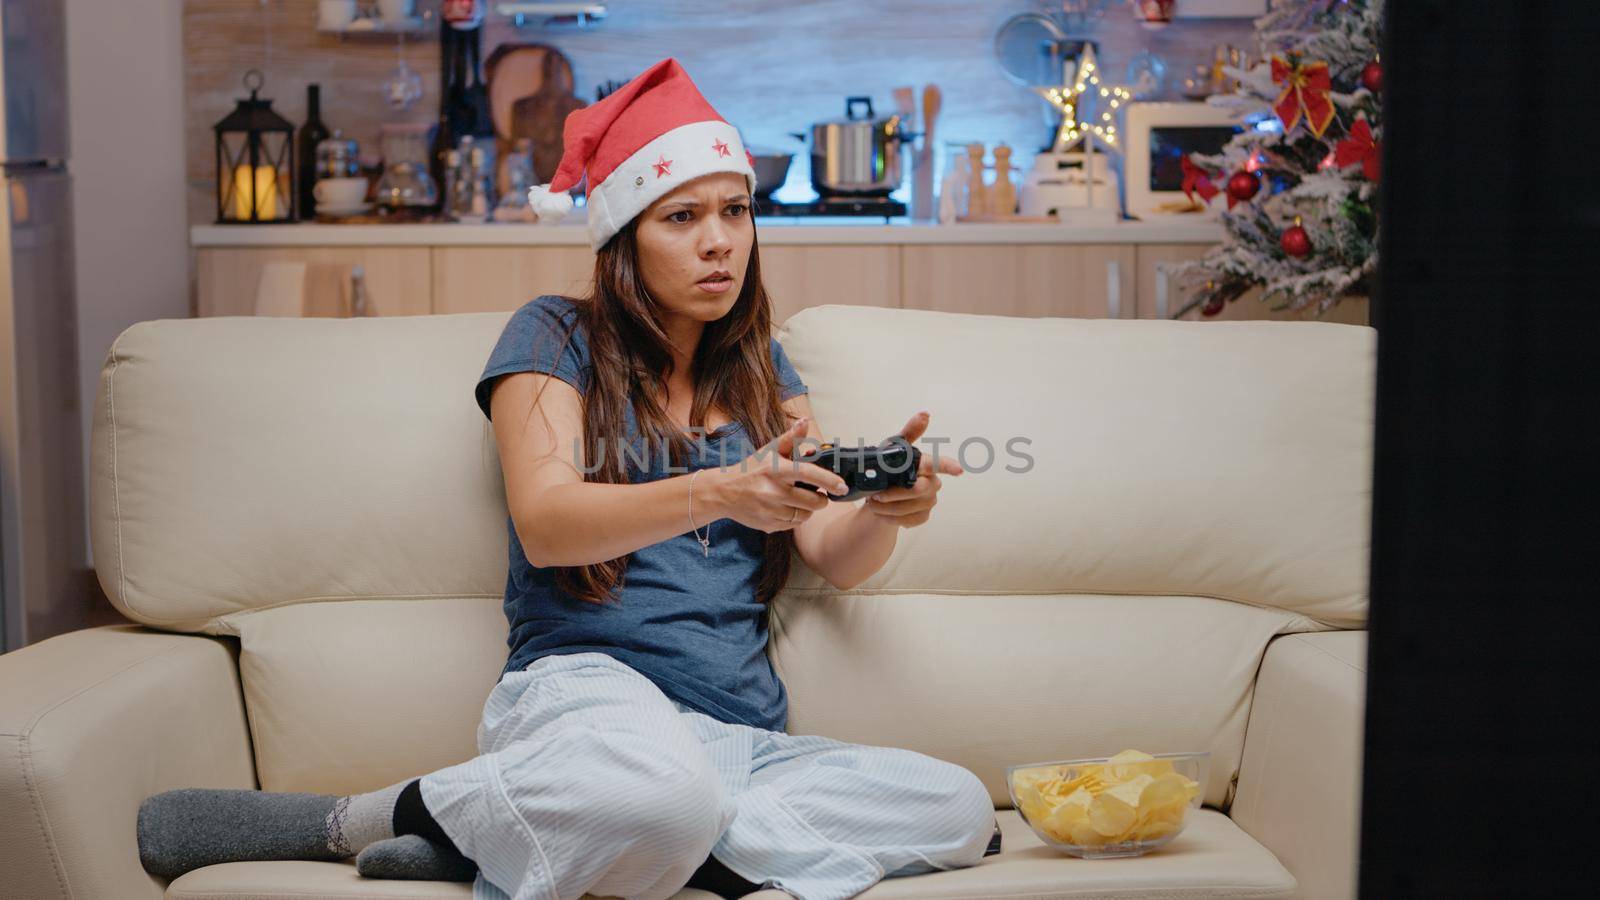 Unhappy adult losing at video games with joystick on tv console by DCStudio